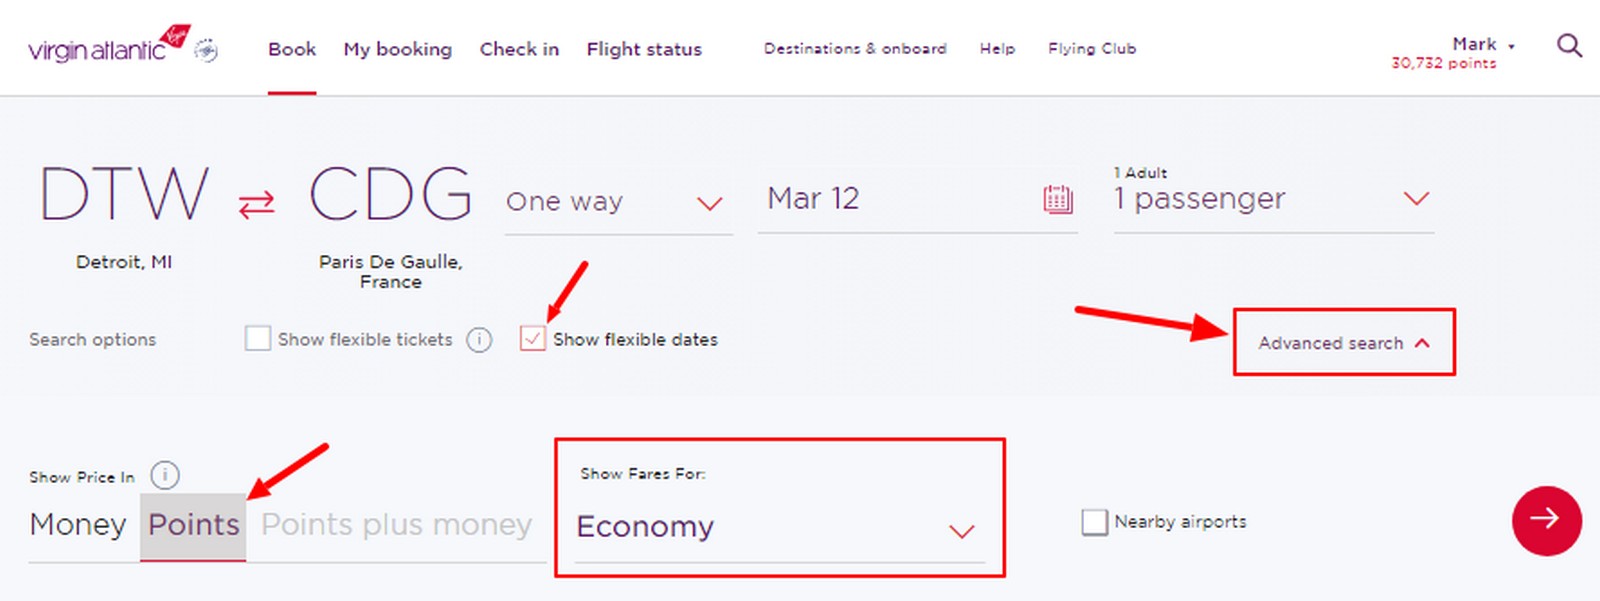 Virgin Atlantic Monthly Award Search: Our Step By Step Guide